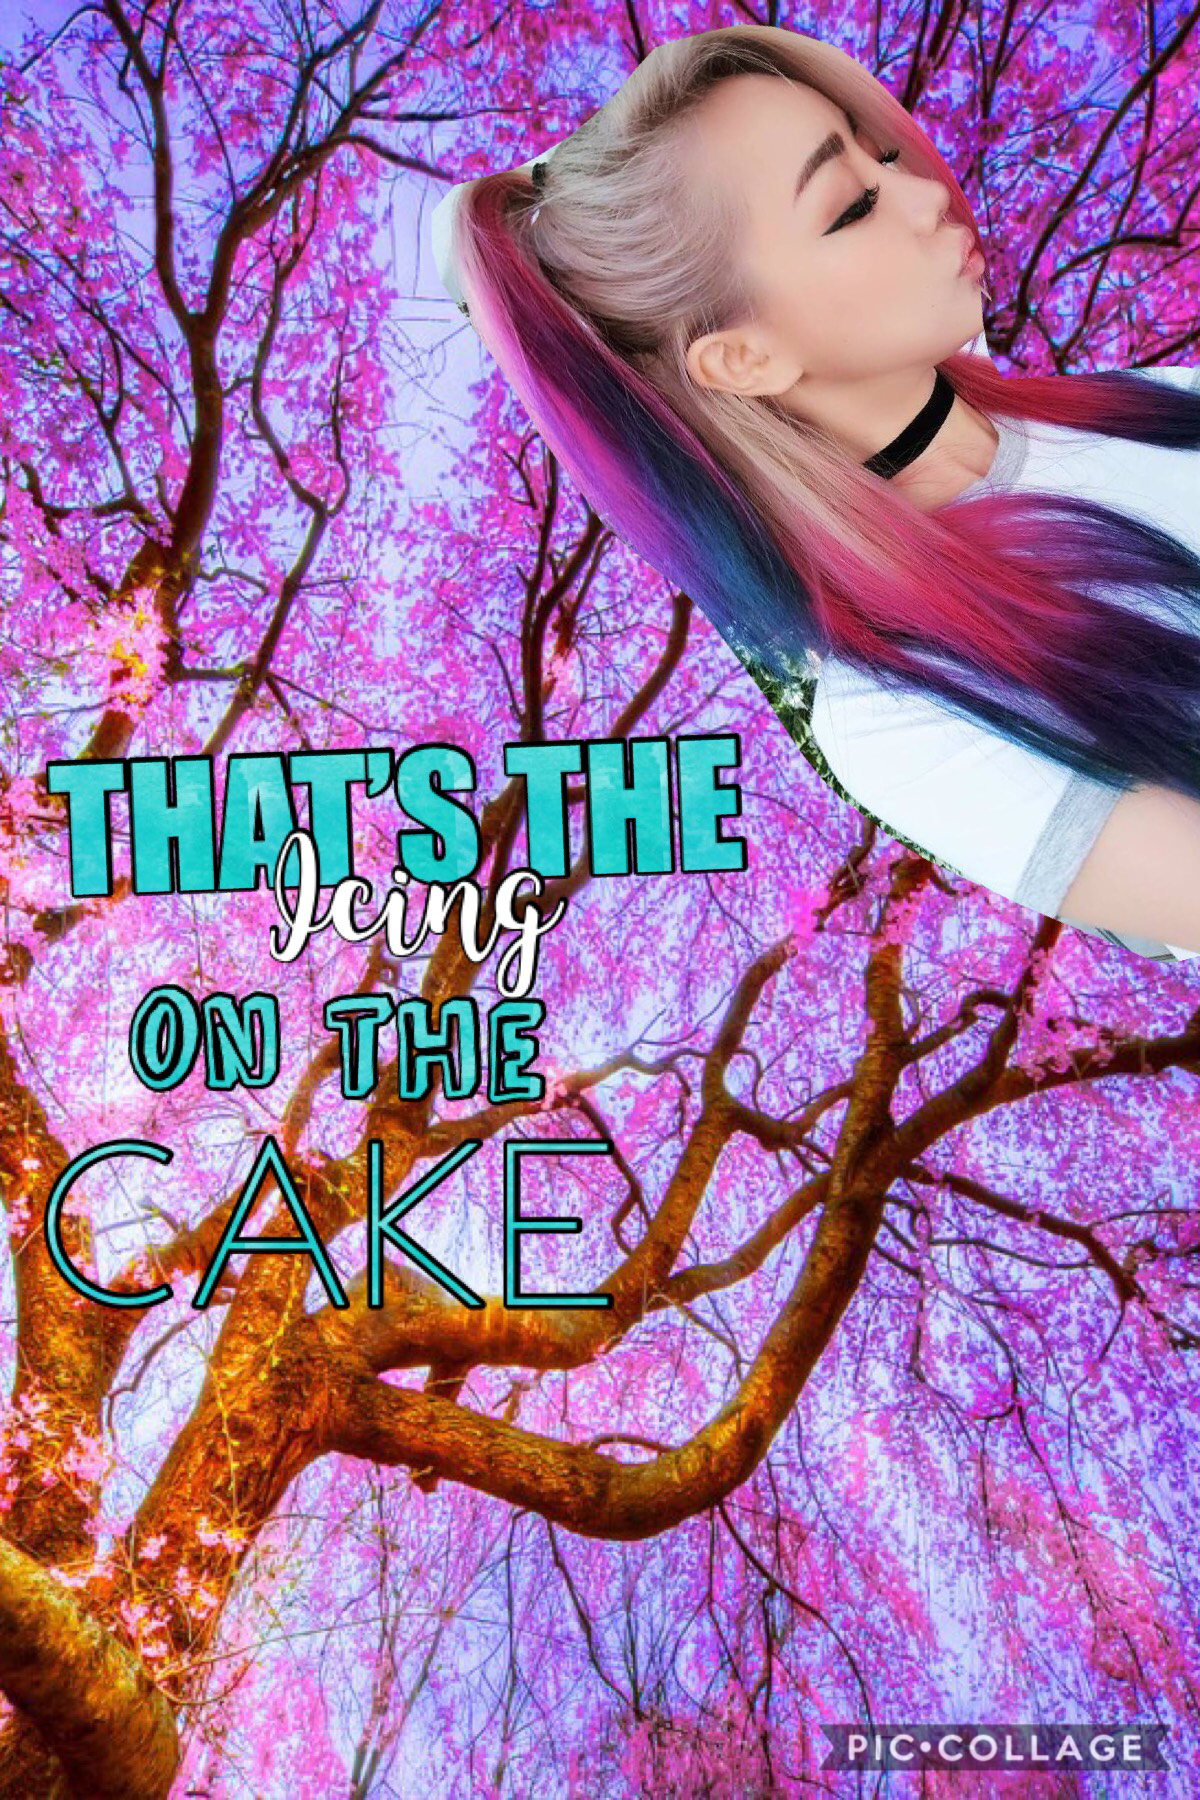 Wengie’s song ‘Cake’ be playing on loop in my playlist😩